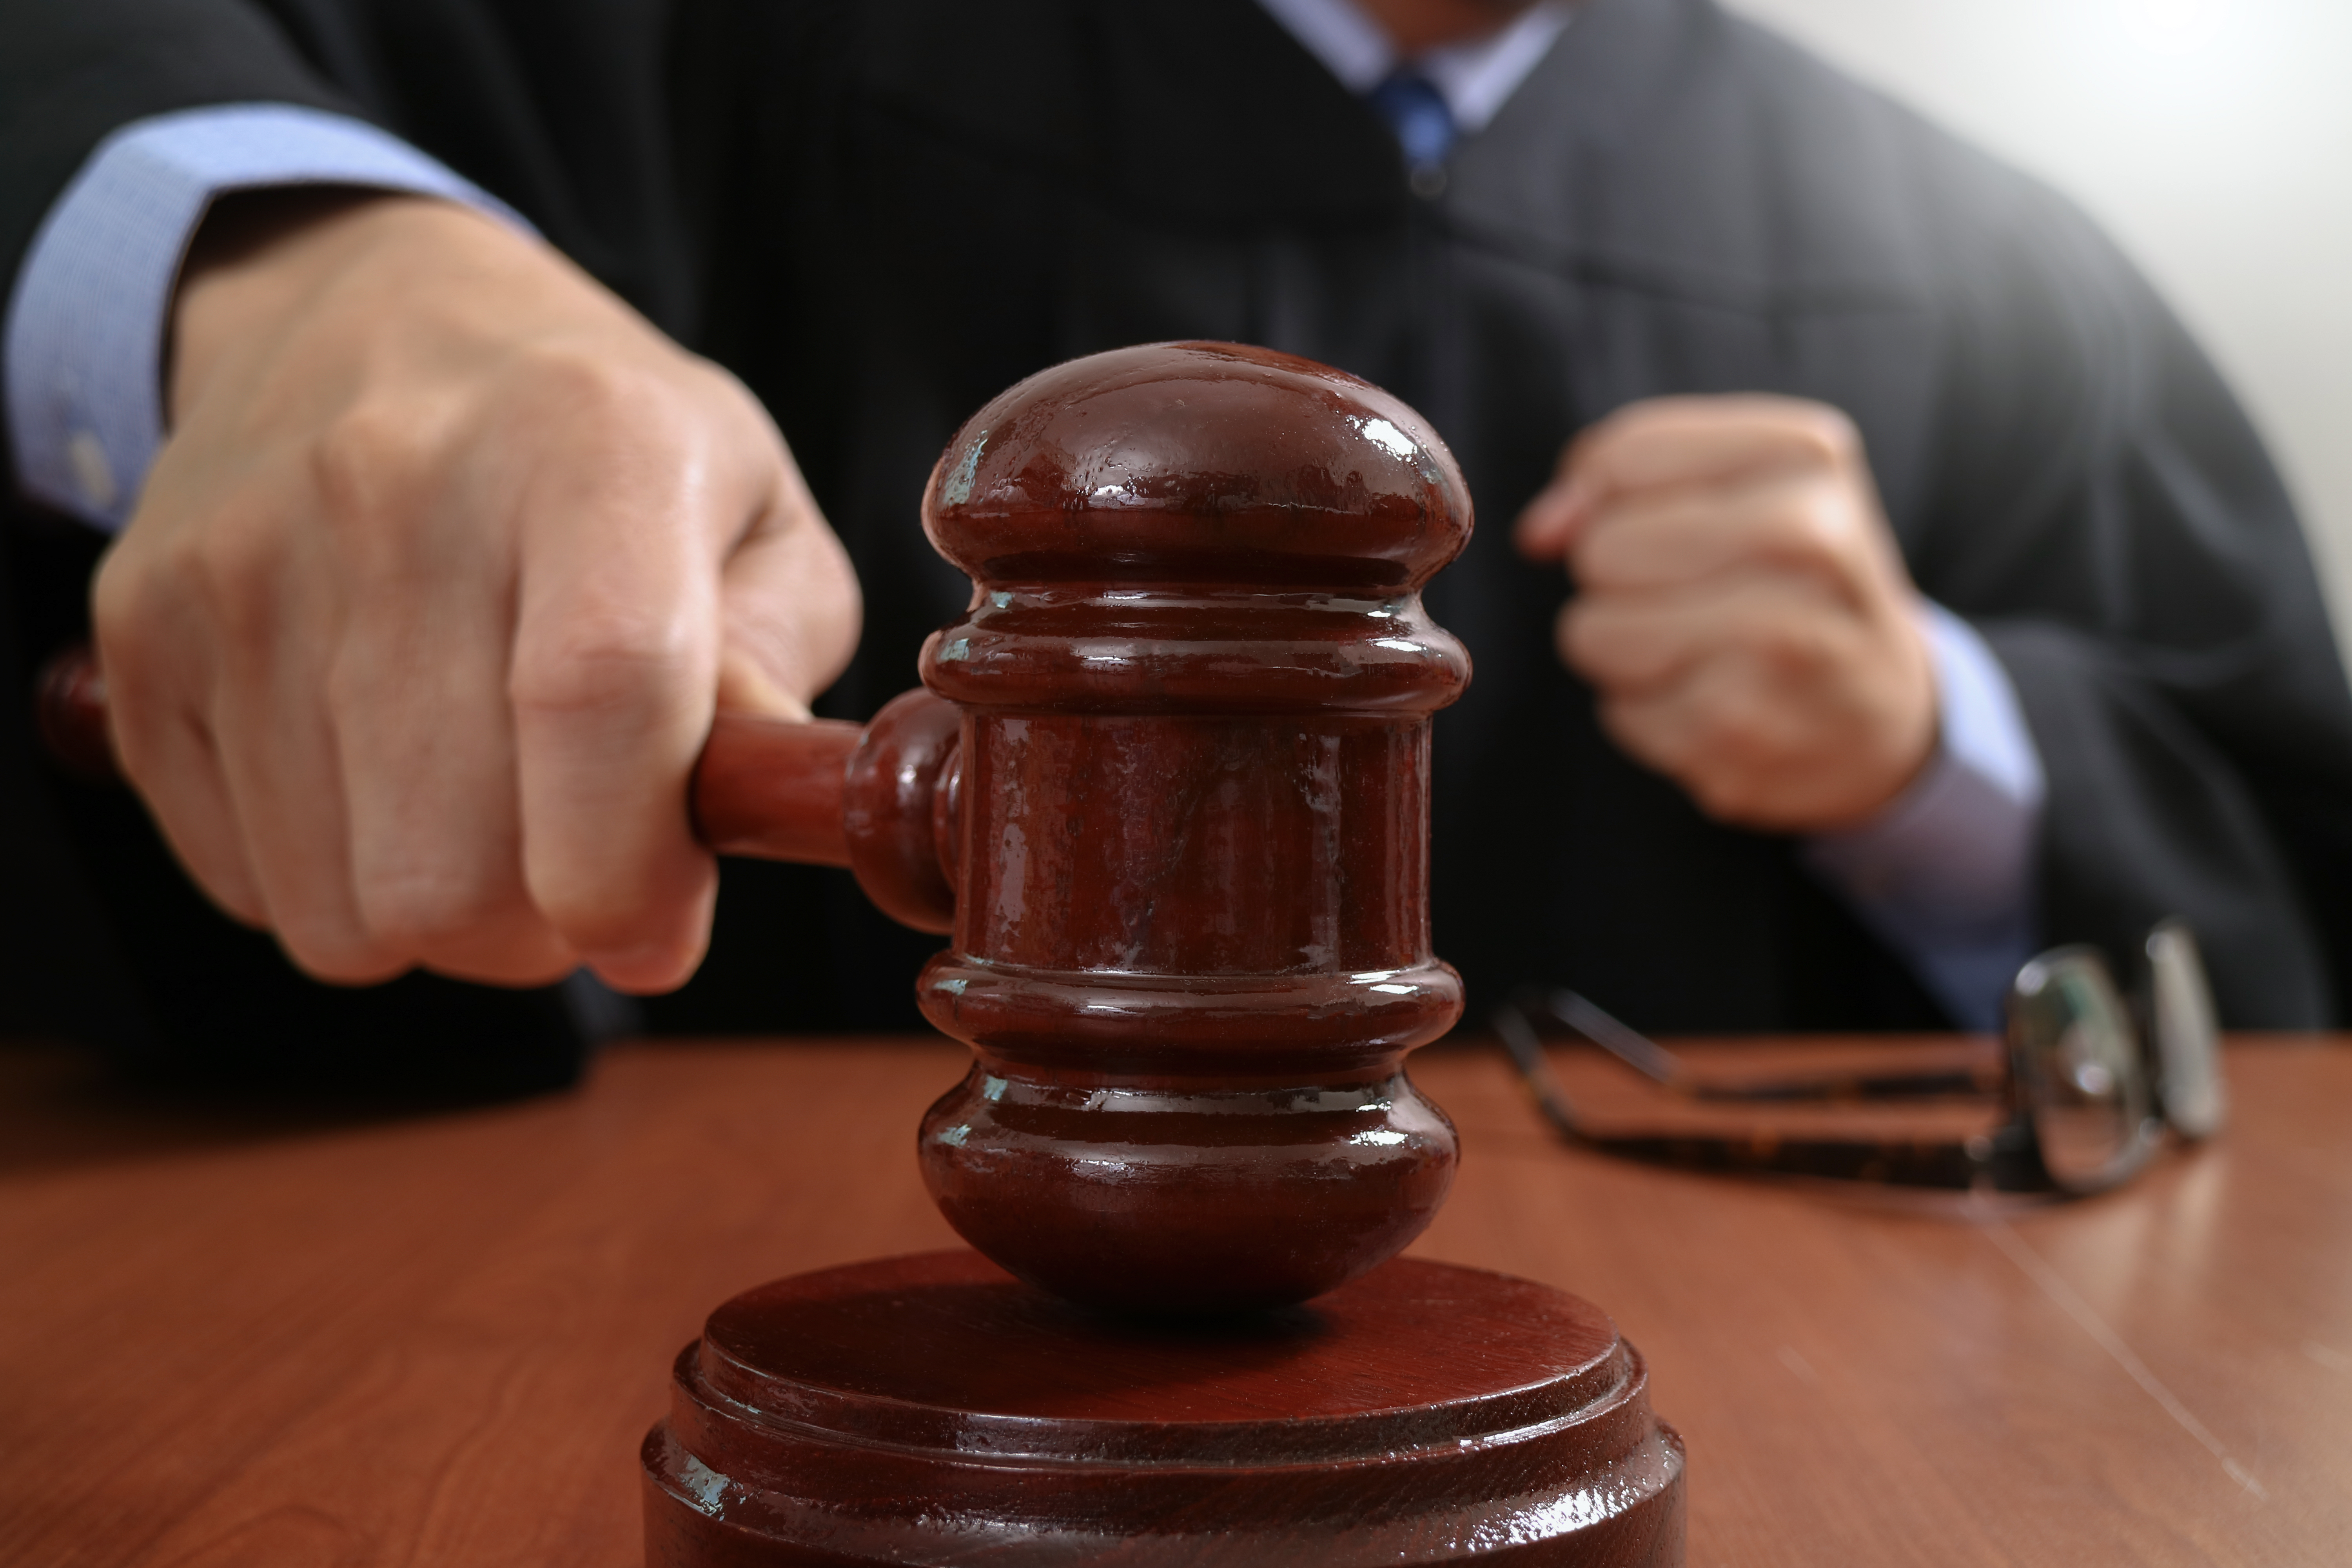 A male judge in a courtroom is pictured hitting his gavel | Source: Shutterstock